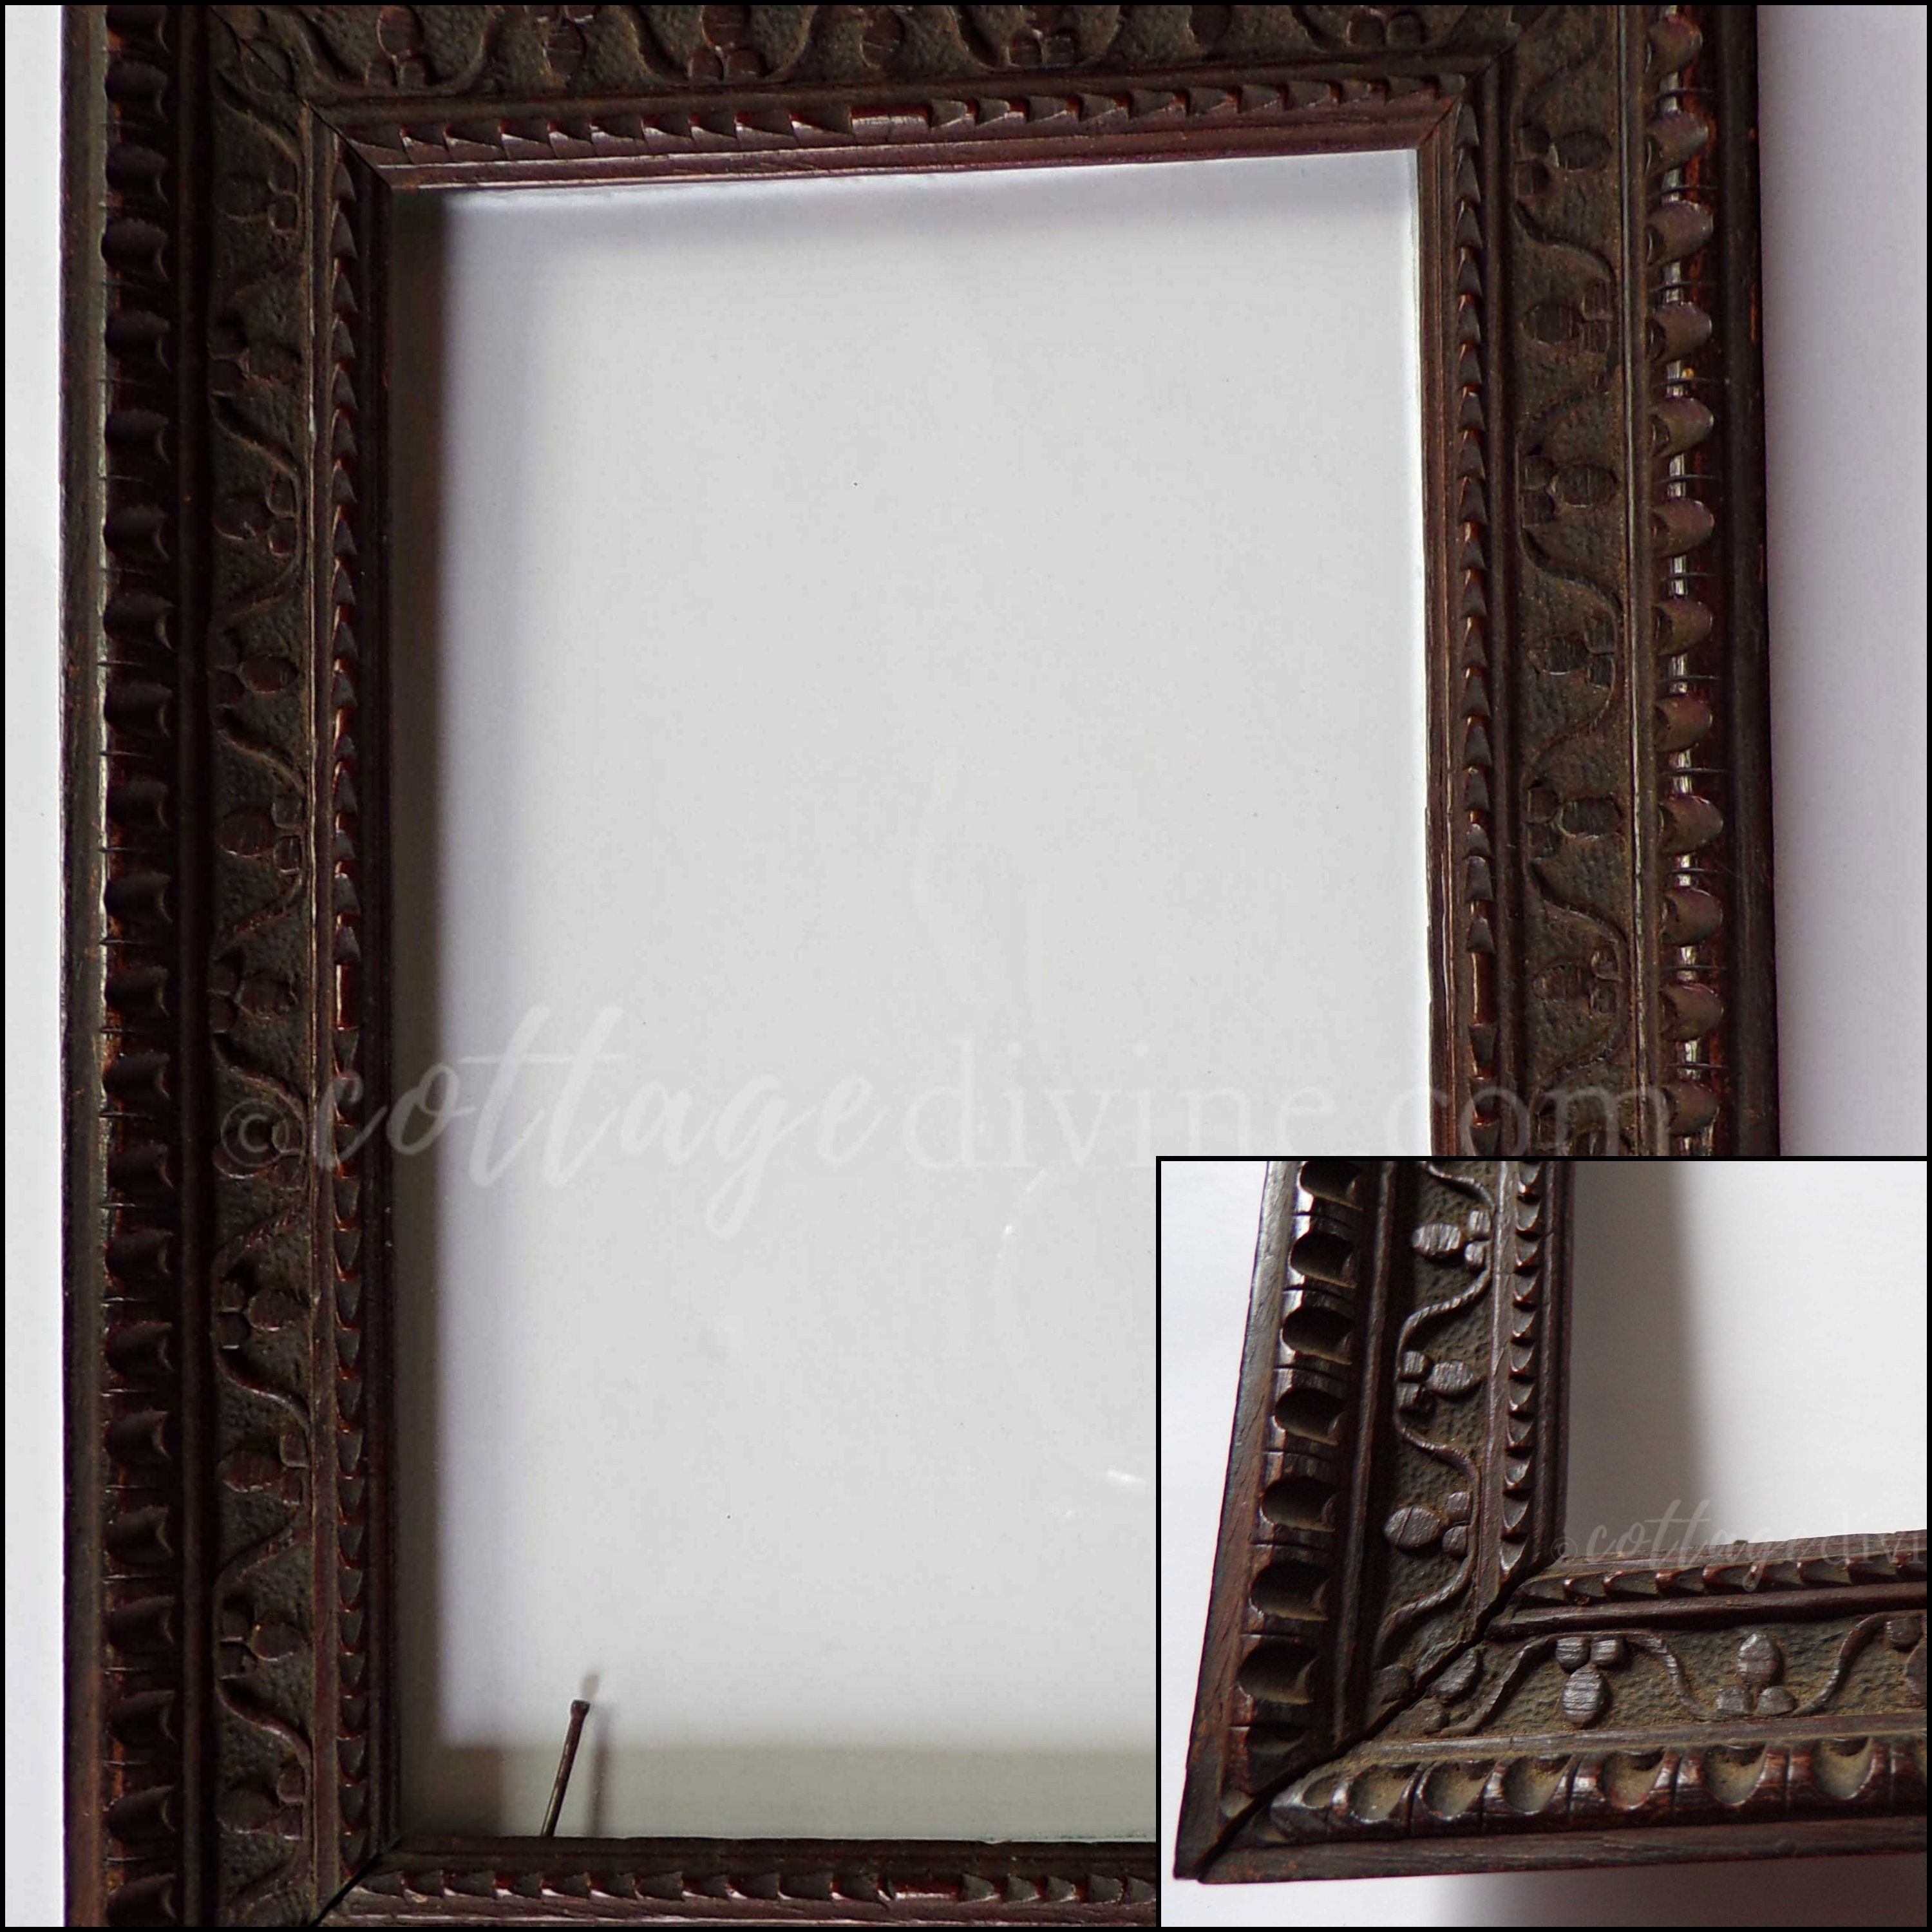 Modern Fluted Texture Silver Photo Frame, Size-4x6